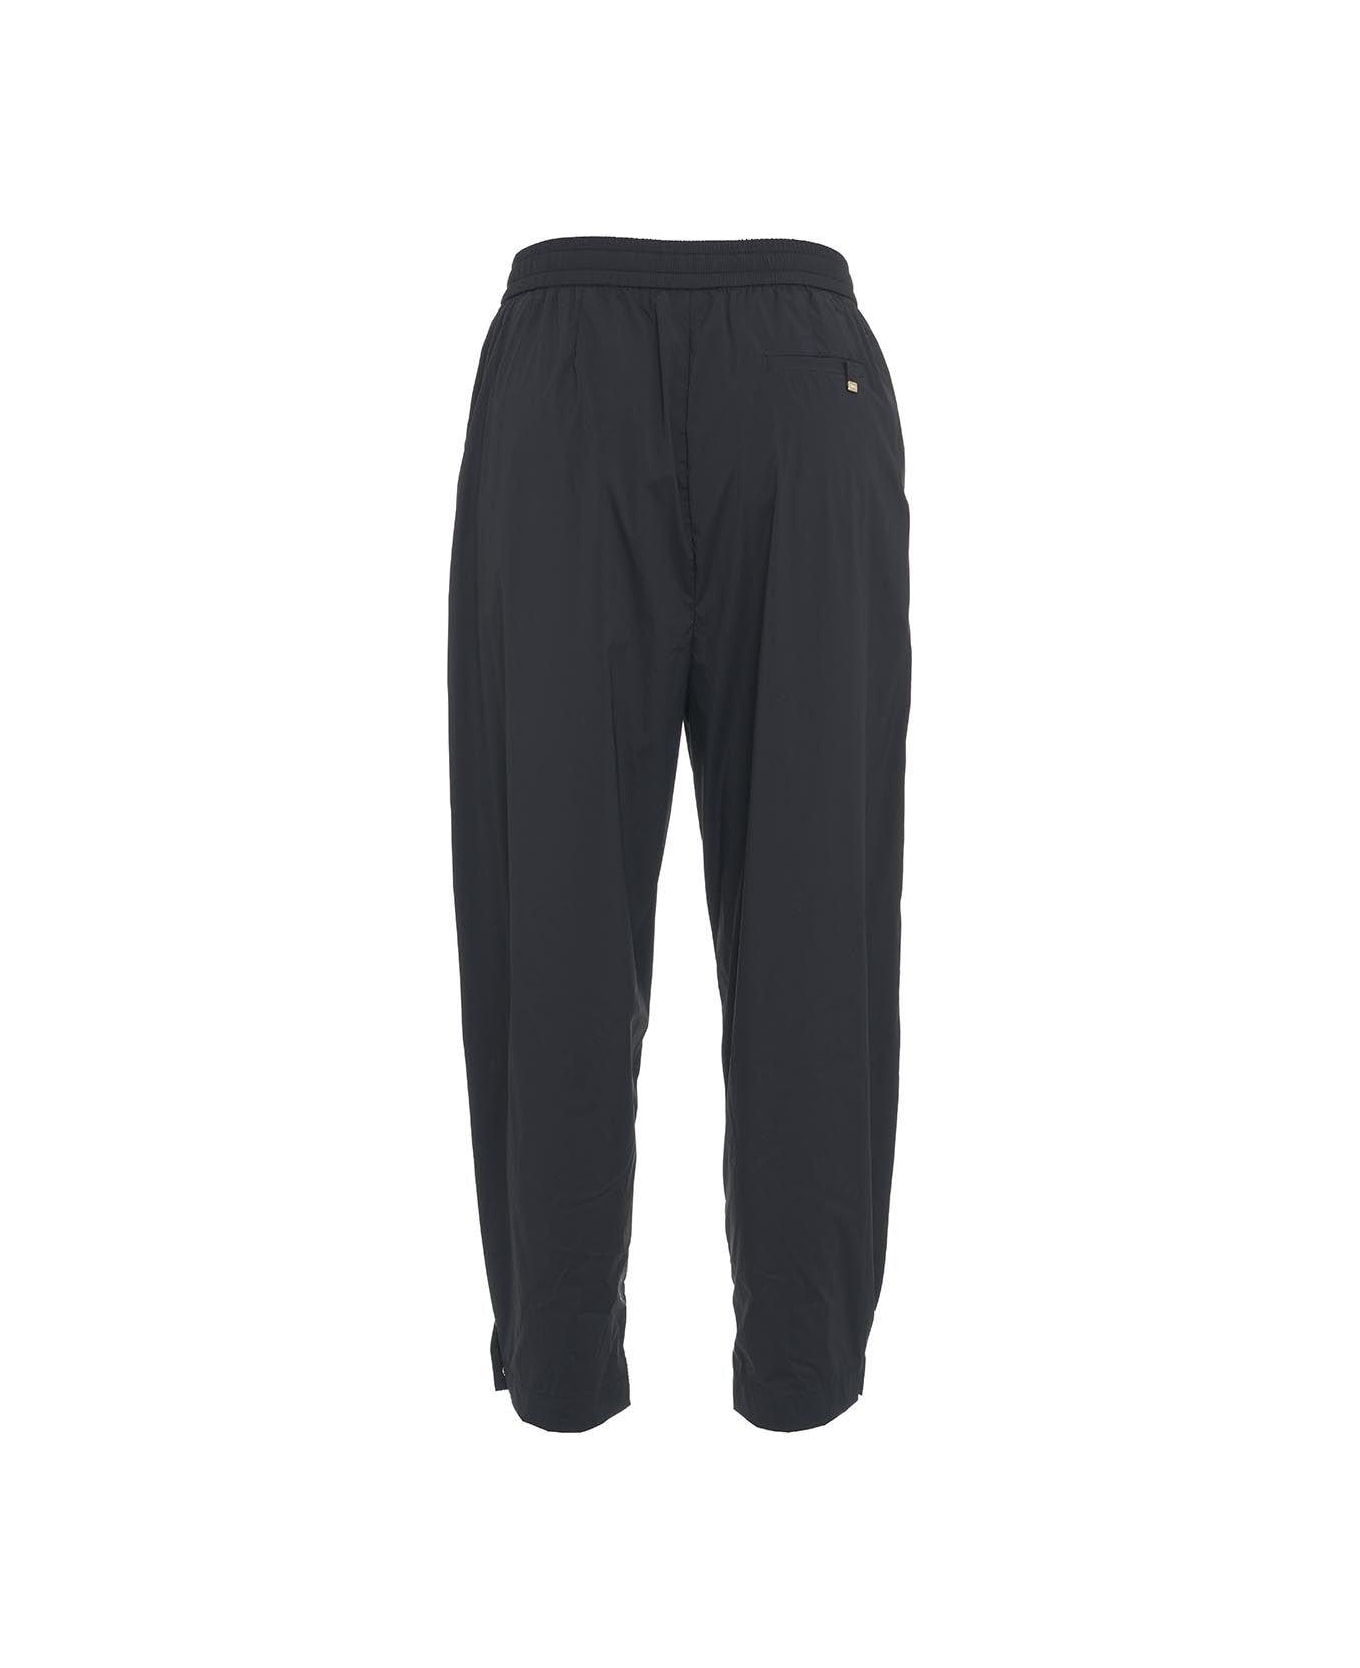 Herno Lightweight Drawstring Cropped Trousers - Black ボトムス